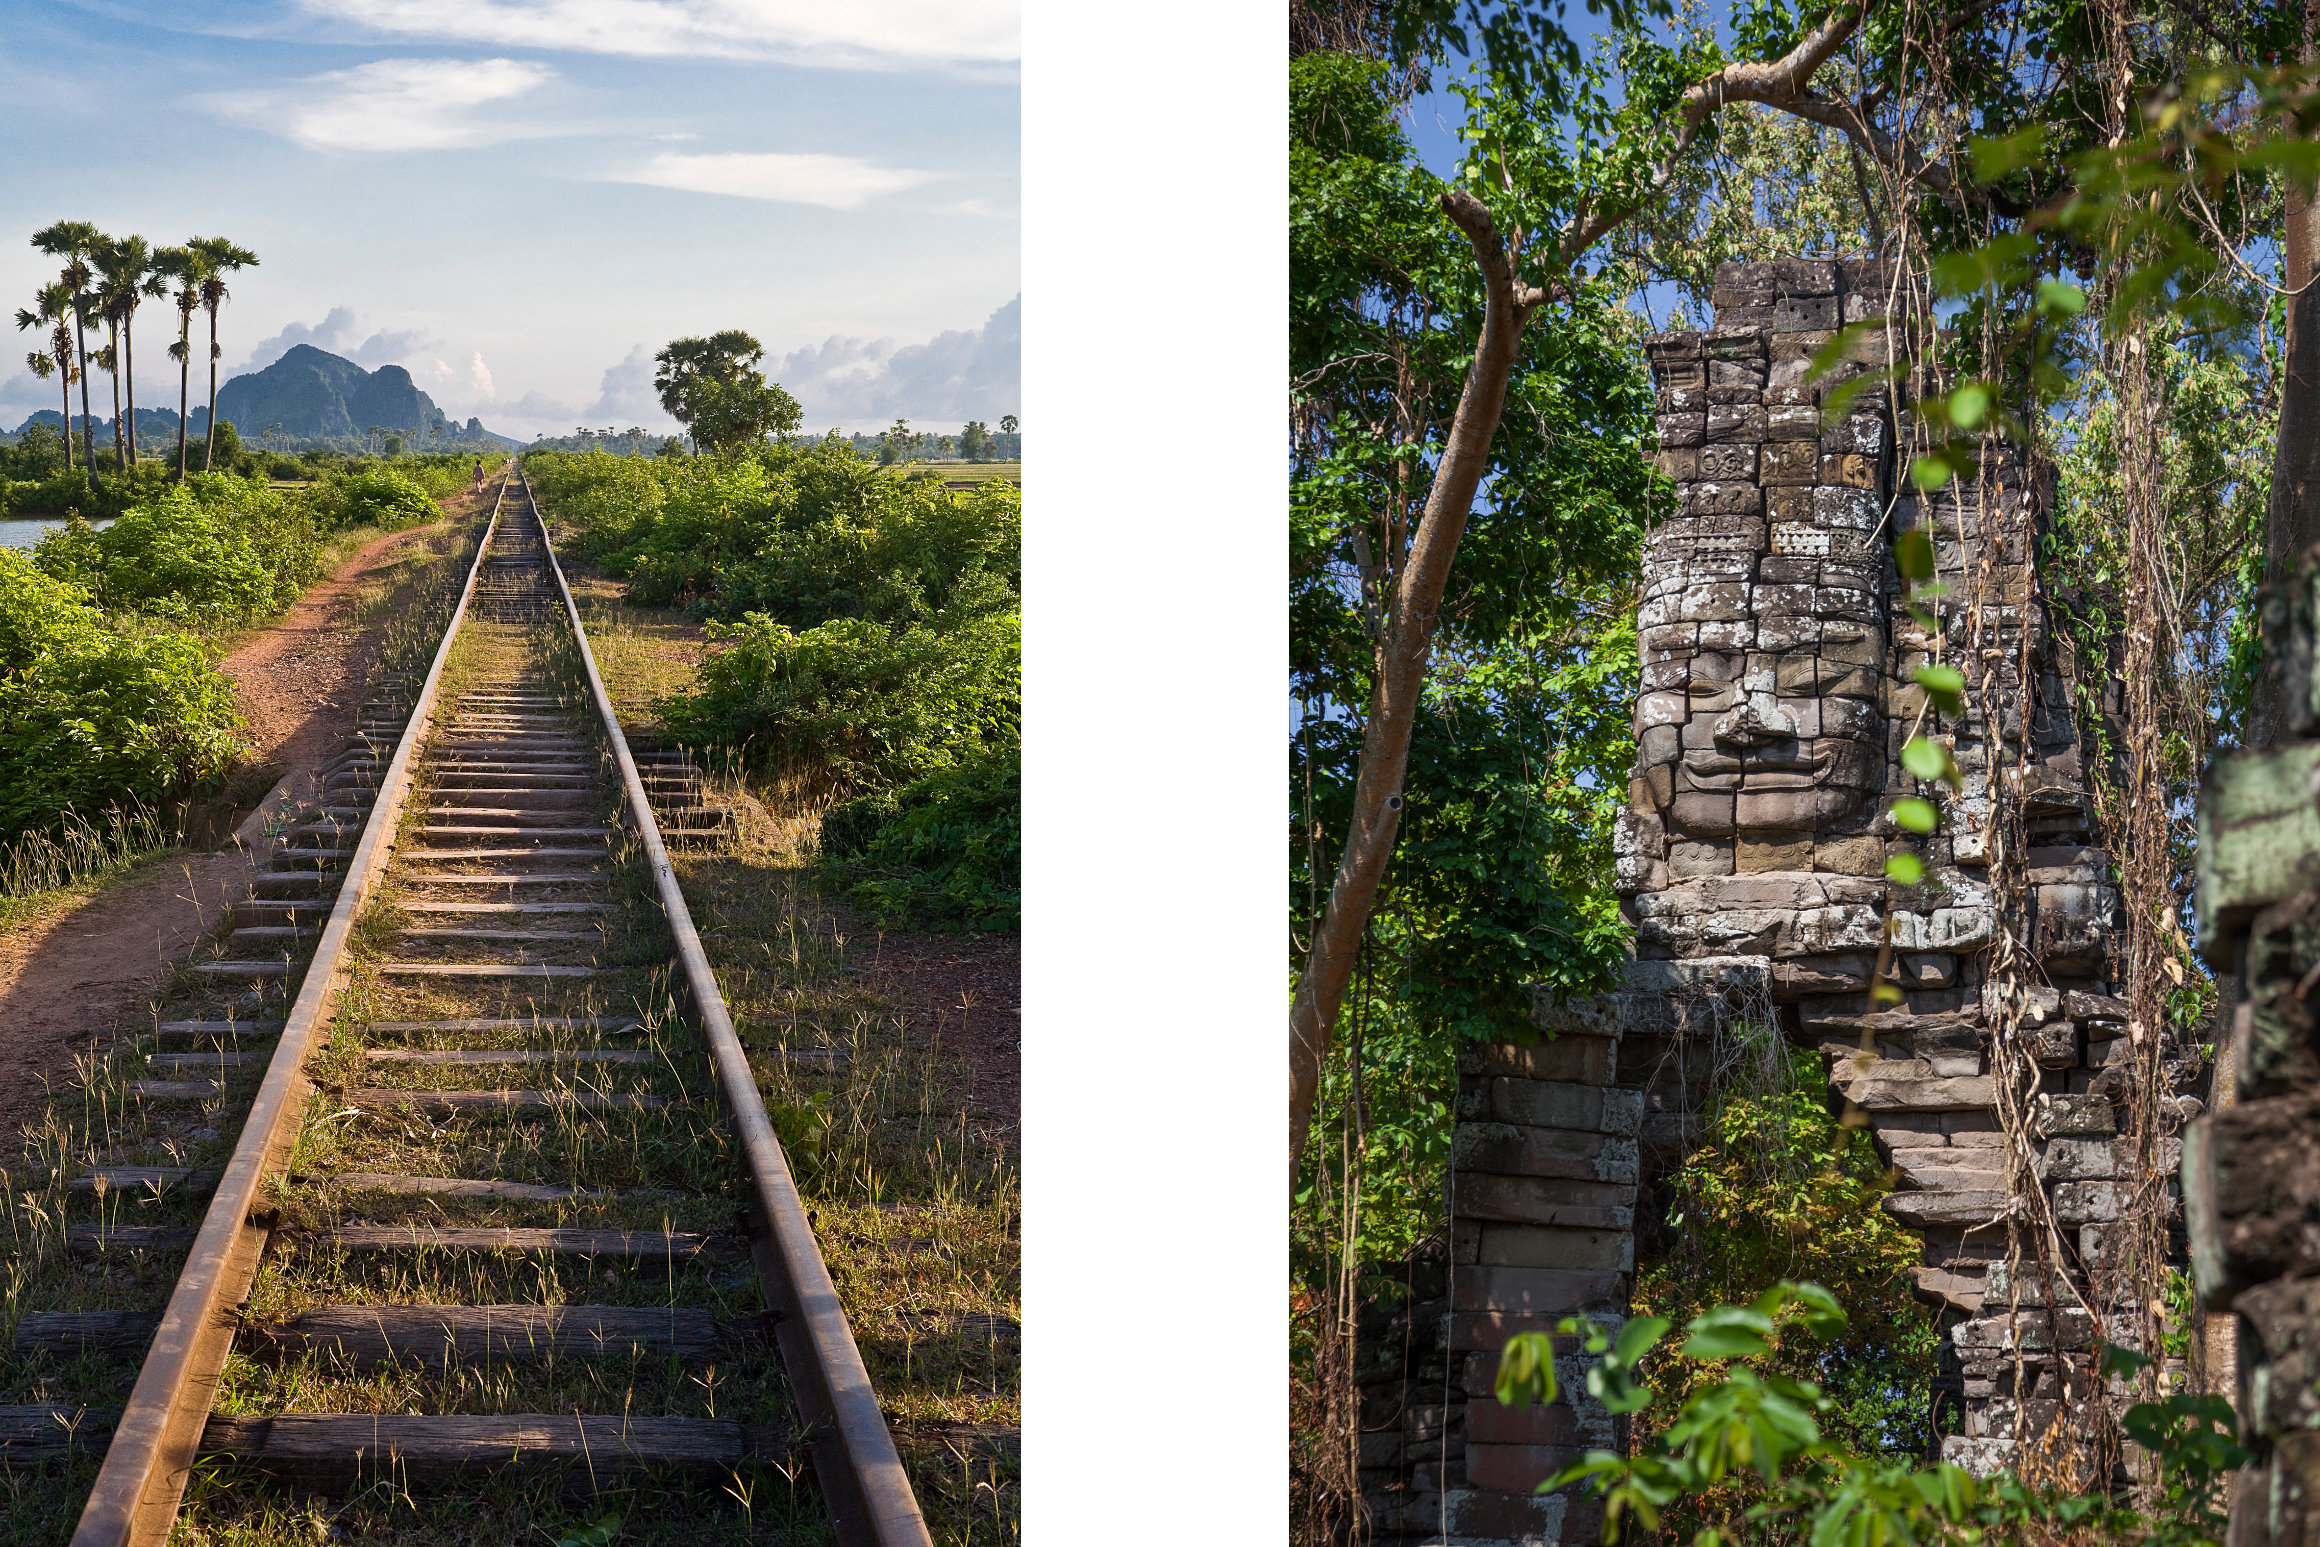 Cambodia rails and ancient temples imagery - Travel Photography